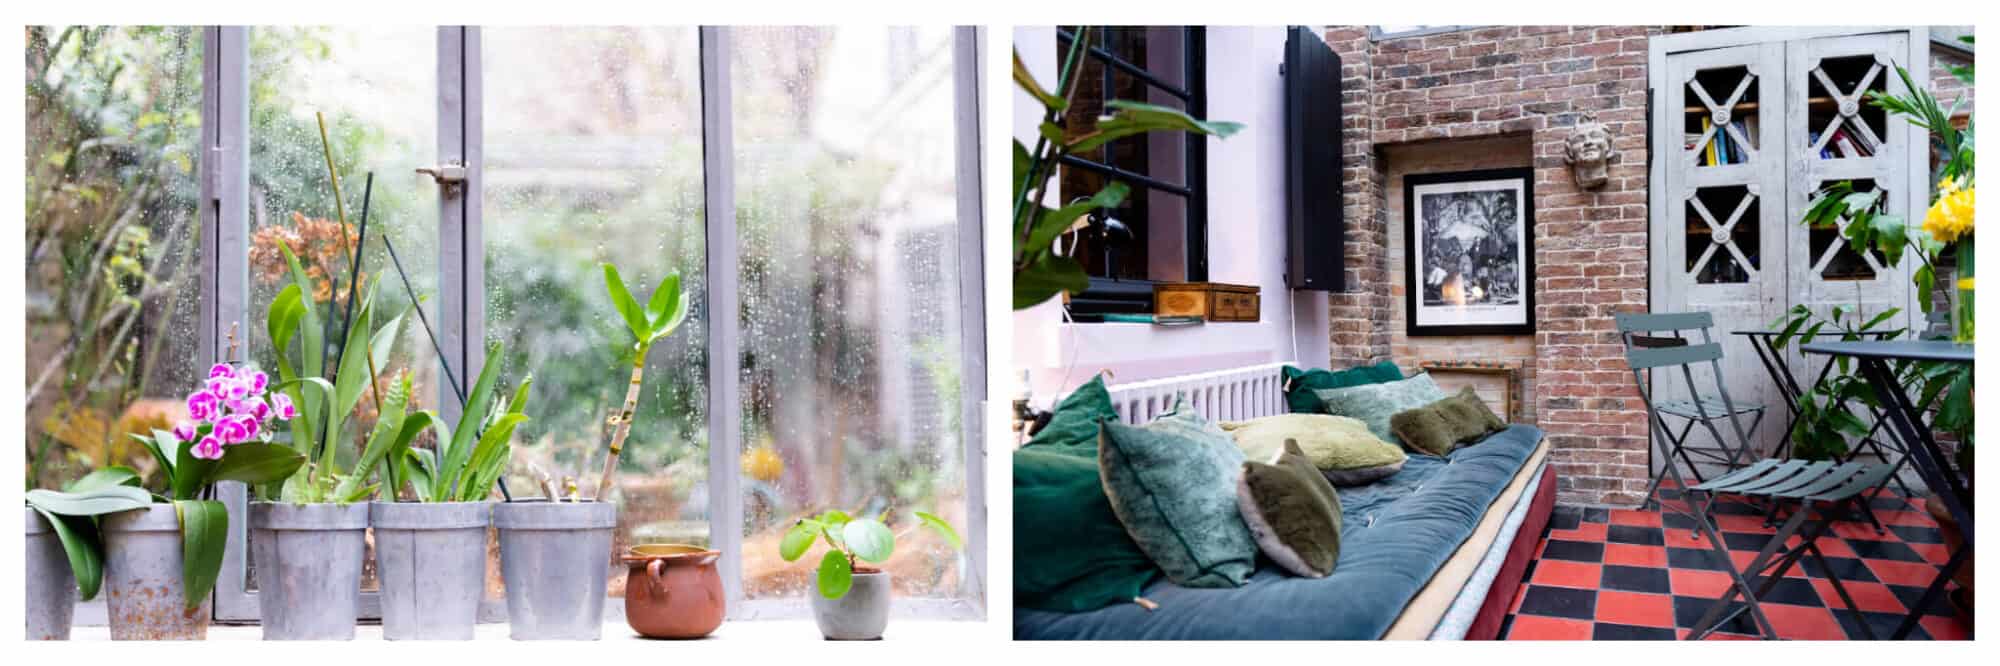 Left: Potted plants line a windowsill at Treize au Jardin in Paris' Latin Quarter, Right: A green bench lined with pillows sits in a room with brick walls and red and black tiled floors at Le 66